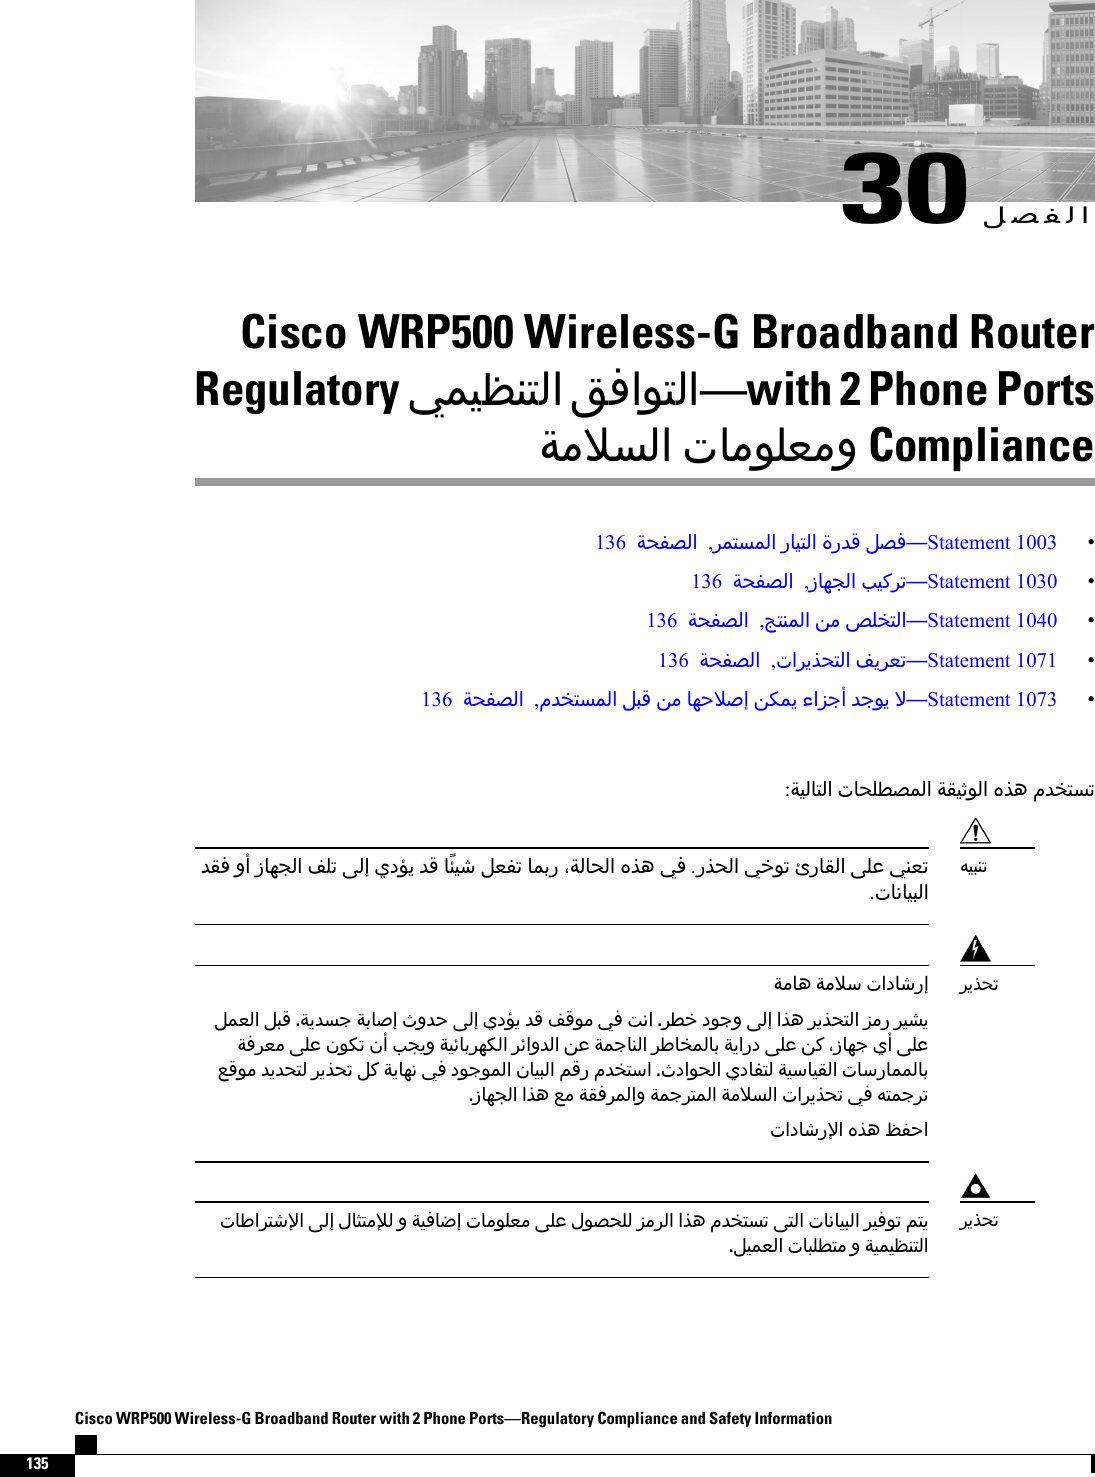 30󰂿󰂝󰂵󰃀Cisco WRP500 Wireless-G Broadband RouterRegulatory 󰃓󰃅󰃕󰂩󰃉󰁹󰃀󰂷󰂴󰃏󰁹󰃀with 2 Phone Ports󰁵󰃄󰃝󰂕󰃀 󰁯󰃄󰃏󰃁󰂭󰃄 Compliance136 󰁵󰂅󰂵󰂝󰃀 ,󰂏󰃅󰁹󰂕󰃅󰃀 󰁯󰃕󰁹󰃀 󰂋󰂸 󰂿󰂝󰂴Statement 1003136 󰁵󰂅󰂵󰂝󰃀 ,󰁯󰃍󰂁󰃀 󰁱󰃕󰂼󰂏󰁸Statement 1030136 󰁵󰂅󰂵󰂝󰃀 ,󰁿󰁹󰃉󰃅󰃀 󰃇󰃄 󰂛󰃁󰂉󰁹󰃀Statement 1040136 󰁵󰂅󰂵󰂝󰃀 ,󰂏󰃔󰂍󰂅󰁹󰃀 󰂳󰃔󰂏󰂭󰁸Statement 1071136 󰁵󰂅󰂵󰂝󰃀 ,󰂋󰂉󰁹󰂕󰃅󰃀 󰂿󰁳󰂸 󰃇󰃄 󰁯󰃍󰂄󰃝󰂜 󰃇󰂽󰃅󰃔 󰂑󰂀 󰂋󰂀󰃏󰃔 󰃜Statement 1073:󰁵󰃕󰃀󰁯󰁹󰃀 󰁯󰂅󰃁󰂥󰂝󰃅󰃀 󰁵󰂹󰃕󰁼󰃏󰃀 󰂍󰃌 󰂋󰂉󰁹󰂕󰁸󰂋󰂹󰂴  󰁯󰃍󰂁󰃀 󰂳󰃁󰁸 󰃑󰃀 󰁧󰃔 󰂋󰂸 󰁯󰁭󰃕󰂘 󰂿󰂭󰂵󰁸 󰁯󰃅󰁲 󰁵󰃀󰁯󰂅󰃀 󰂍󰃌 󰃓󰂴 .󰂍󰂅󰃀 󰃓󰂈󰃏󰁸 󰁯󰂹󰃀 󰃑󰃁󰂬 󰃓󰃉󰂭󰁸.󰁯󰃈󰁯󰃕󰁳󰃀󰃋󰃕󰁳󰃉󰁸󰁵󰃄󰁯󰃌 󰁵󰃄󰃝󰂔 󰁯󰂘󰂿󰃅󰂭󰃀 󰂿󰁳󰂸 .󰁵󰃔󰂋󰂕󰂀 󰁵󰁲󰁯󰂜 󰂋󰂄 󰃑󰃀 󰁧󰃔 󰂋󰂸 󰂳󰂸󰃏󰃄 󰃓󰂴 󰁷󰃈 .󰂏󰂥󰂈 󰃏󰂀 󰃑󰃀 󰂍󰃌 󰂏󰃔󰂍󰂅󰁹󰃀 󰂑󰃄 󰂏󰃕󰂙󰃔󰁵󰂴󰂏󰂭󰃄 󰃑󰃁󰂬 󰃏󰂽󰁸  󰁱󰂁󰃔 󰁵󰃕󰁬󰁯󰁲󰂏󰃍󰂽󰃀 󰂏󰁬󰂋󰃀 󰃇󰂬 󰁵󰃅󰂀󰁯󰃉󰃀 󰂏󰂤󰁯󰂉󰃅󰃀󰁯󰁲 󰁵󰃔 󰃑󰃁󰂬 󰃇󰂼 󰁯󰃍󰂀  󰃑󰃁󰂬󰂫󰂸󰃏󰃄 󰂋󰃔󰂋󰂅󰁹󰃀 󰂏󰃔󰂍󰂅󰁸 󰂿󰂼 󰁵󰃔󰁯󰃍󰃈 󰃓󰂴 󰃏󰂀󰃏󰃅󰃀 󰁯󰃕󰁳󰃀 󰃃󰂸 󰂋󰂉󰁹󰂔 .󰃏󰂅󰃀 󰁯󰂵󰁹󰃀 󰁵󰃕󰂔󰁯󰃕󰂹󰃀 󰁯󰂔󰁯󰃅󰃅󰃀󰁯󰁲.󰁯󰃍󰂁󰃀 󰂍󰃌 󰂫󰃄 󰁵󰂹󰂴󰂏󰃅󰃀 󰁵󰃅󰂀󰂏󰁹󰃅󰃀 󰁵󰃄󰃝󰂕󰃀 󰂏󰃔󰂍󰂅󰁸 󰃓󰂴 󰃋󰁹󰃅󰂀󰂏󰁸󰁯󰂘󰃚 󰂍󰃌 󰂧󰂵󰂄󰂏󰃔󰂍󰂅󰁸󰁯󰂤󰂏󰁹󰂘󰃚 󰃑󰃀 󰁯󰁽󰁹󰃄󰃛󰃀  󰁵󰃕󰂴󰁯󰂠 󰁯󰃄󰃏󰃁󰂭󰃄 󰃑󰃁󰂬 󰃏󰂝󰂅󰃁󰃀 󰂑󰃄󰂏󰃀 󰂍󰃌 󰂋󰂉󰁹󰂕󰁸 󰃑󰁹󰃀 󰁯󰃈󰁯󰃕󰁳󰃀 󰂏󰃕󰂴󰃏󰁸 󰃃󰁹󰃔.󰂿󰃕󰃅󰂭󰃀 󰁯󰁳󰃁󰂥󰁹󰃄  󰁵󰃕󰃅󰃕󰂩󰃉󰁹󰃀󰂏󰃔󰂍󰂅󰁸Cisco WRP500 Wireless-G Broadband Router with 2 Phone PortsRegulatory Compliance and Safety Information135